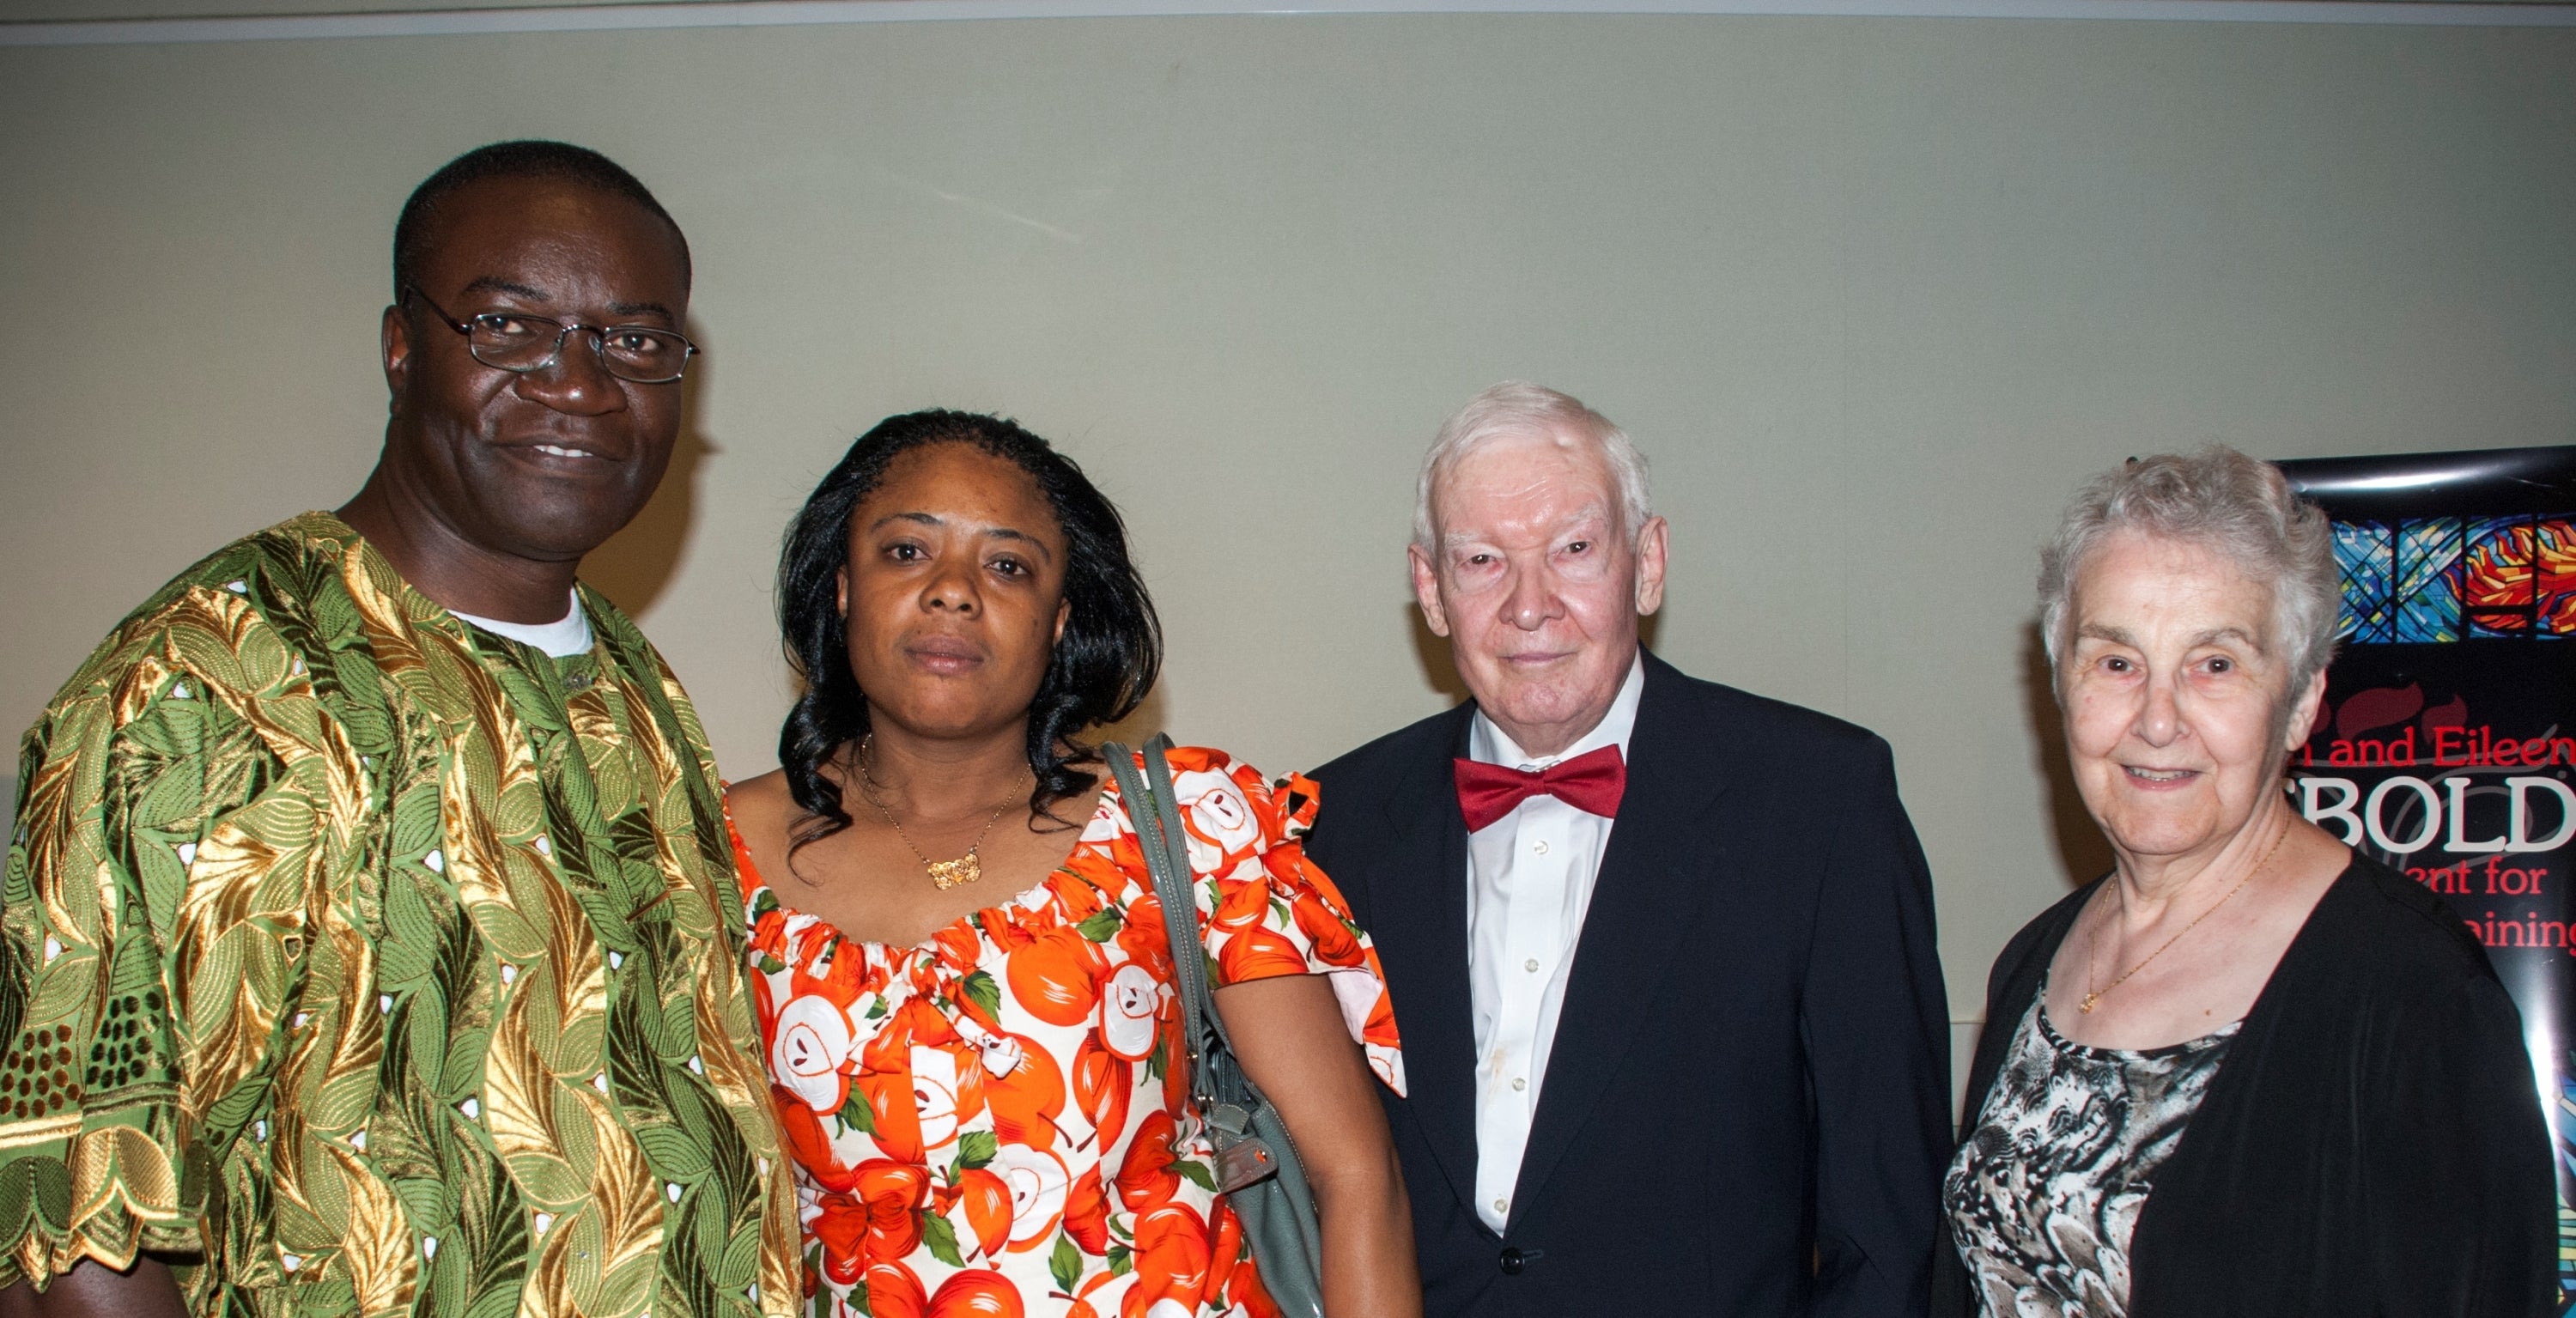 2014 Lebold Banquet speaker Roberson Mbayamvula stands  with his wife, Caris Bango, as well as Ralph and Eileen Lebold.